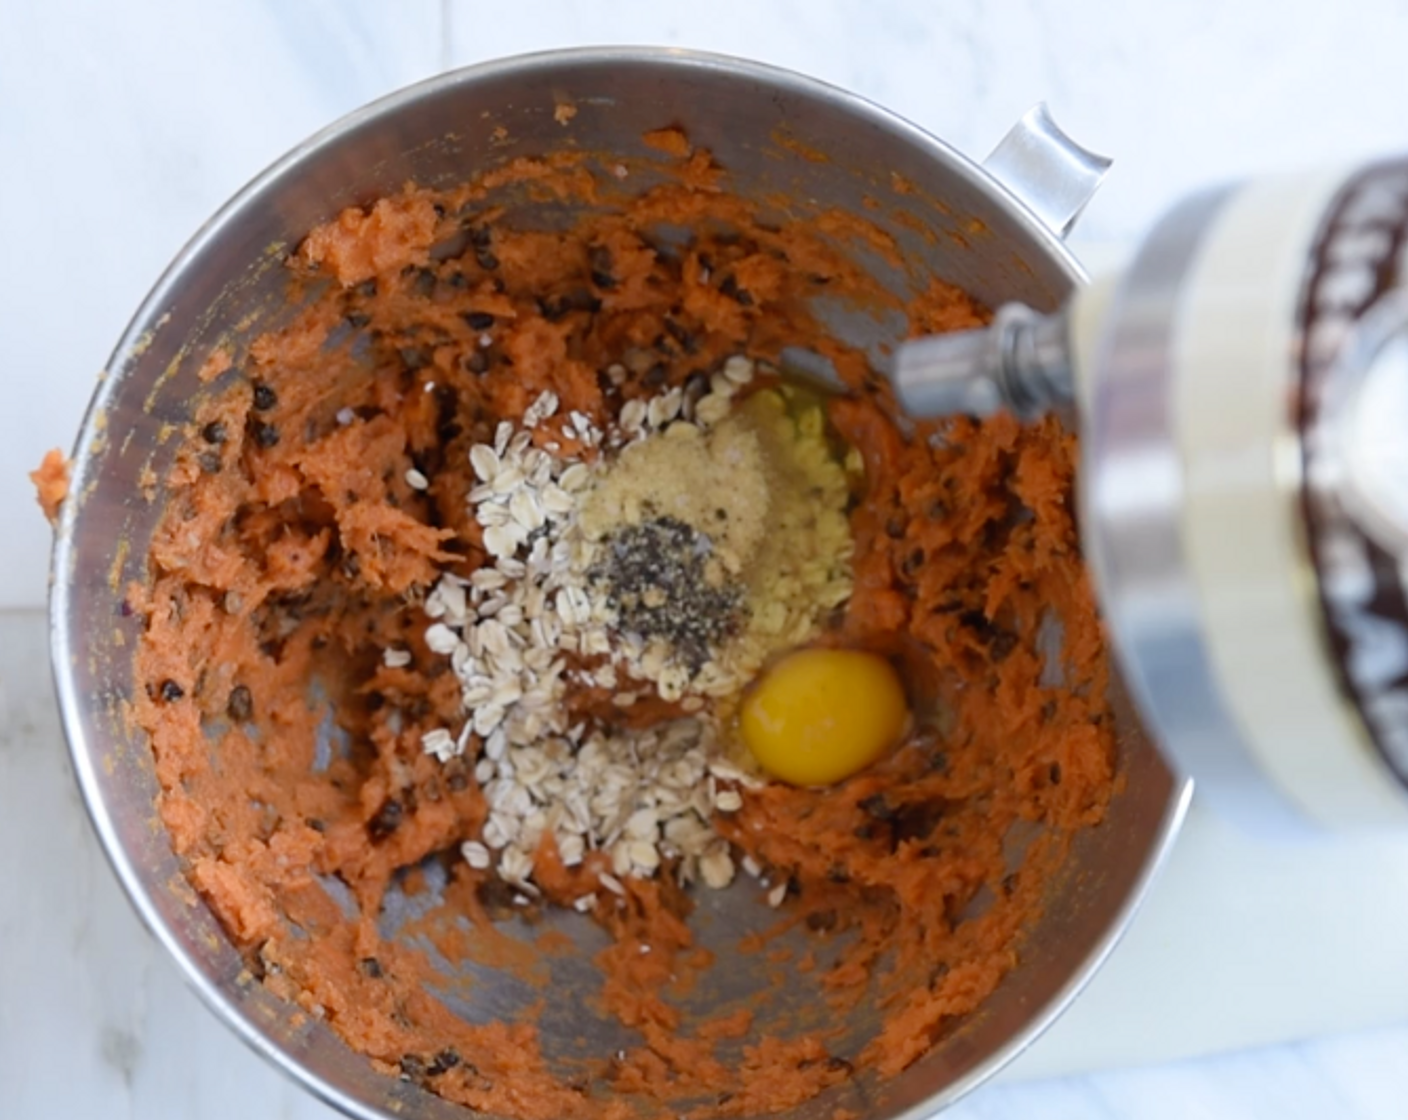 step 3 In a large mixing bowl, combine Black Beans (1 cup), Sweet Potato (1 cup), Quick Cooking Oats (1/2 cup), Egg (1), Onion Powder (1/2 tsp) and Ground Black Pepper (1/4 tsp). Stir until ingredients are evenly distributed.